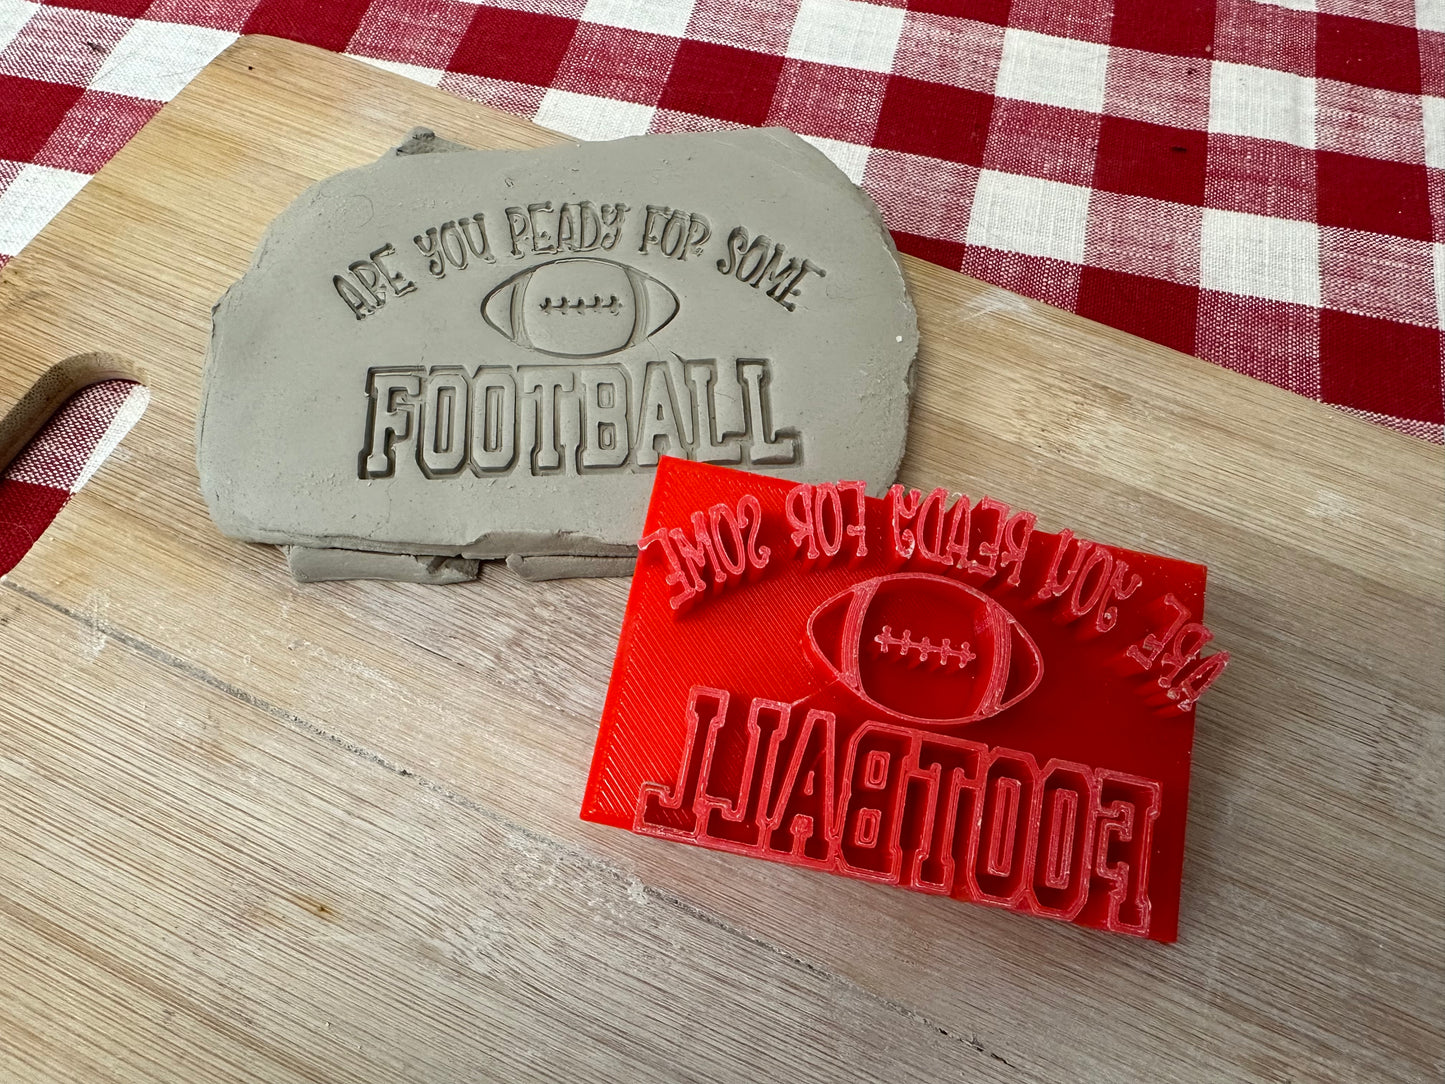 "Are You Ready for Some Football" word stamp - plastic 3D printed, multiple sizes